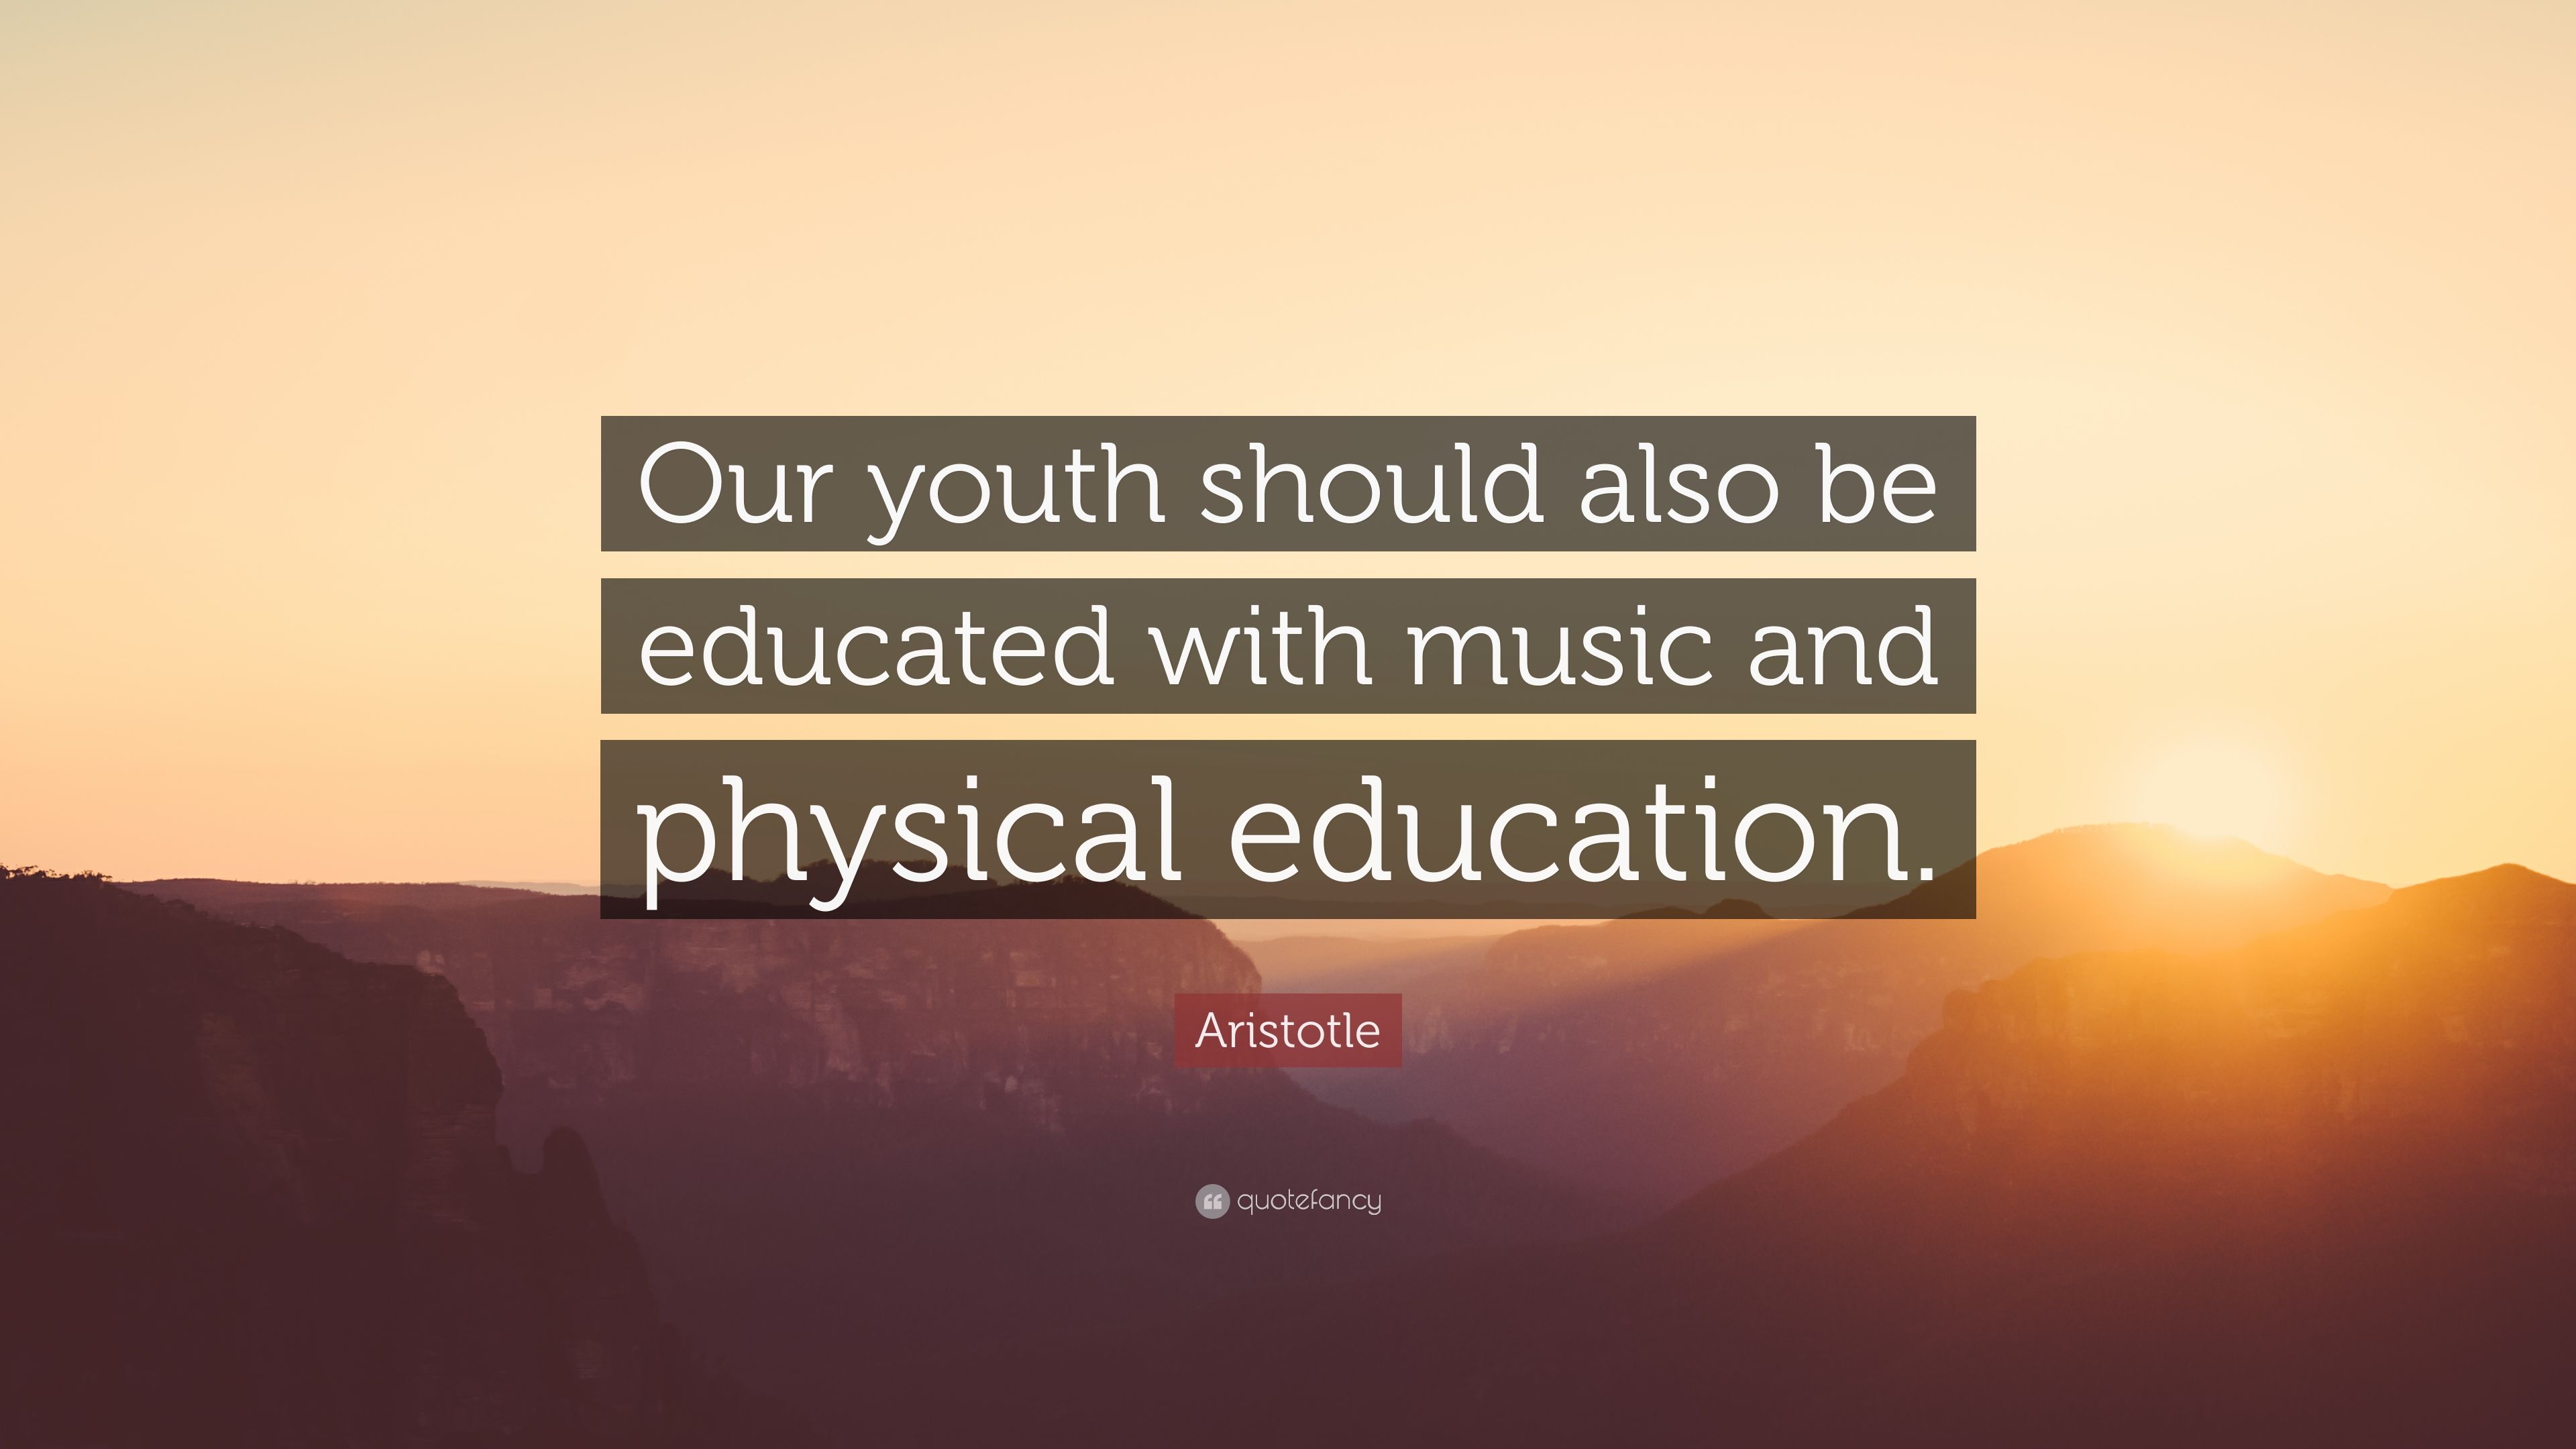 Aristotle Quote: “Our youth should also be educated with music and physical education.” (12 wallpaper)